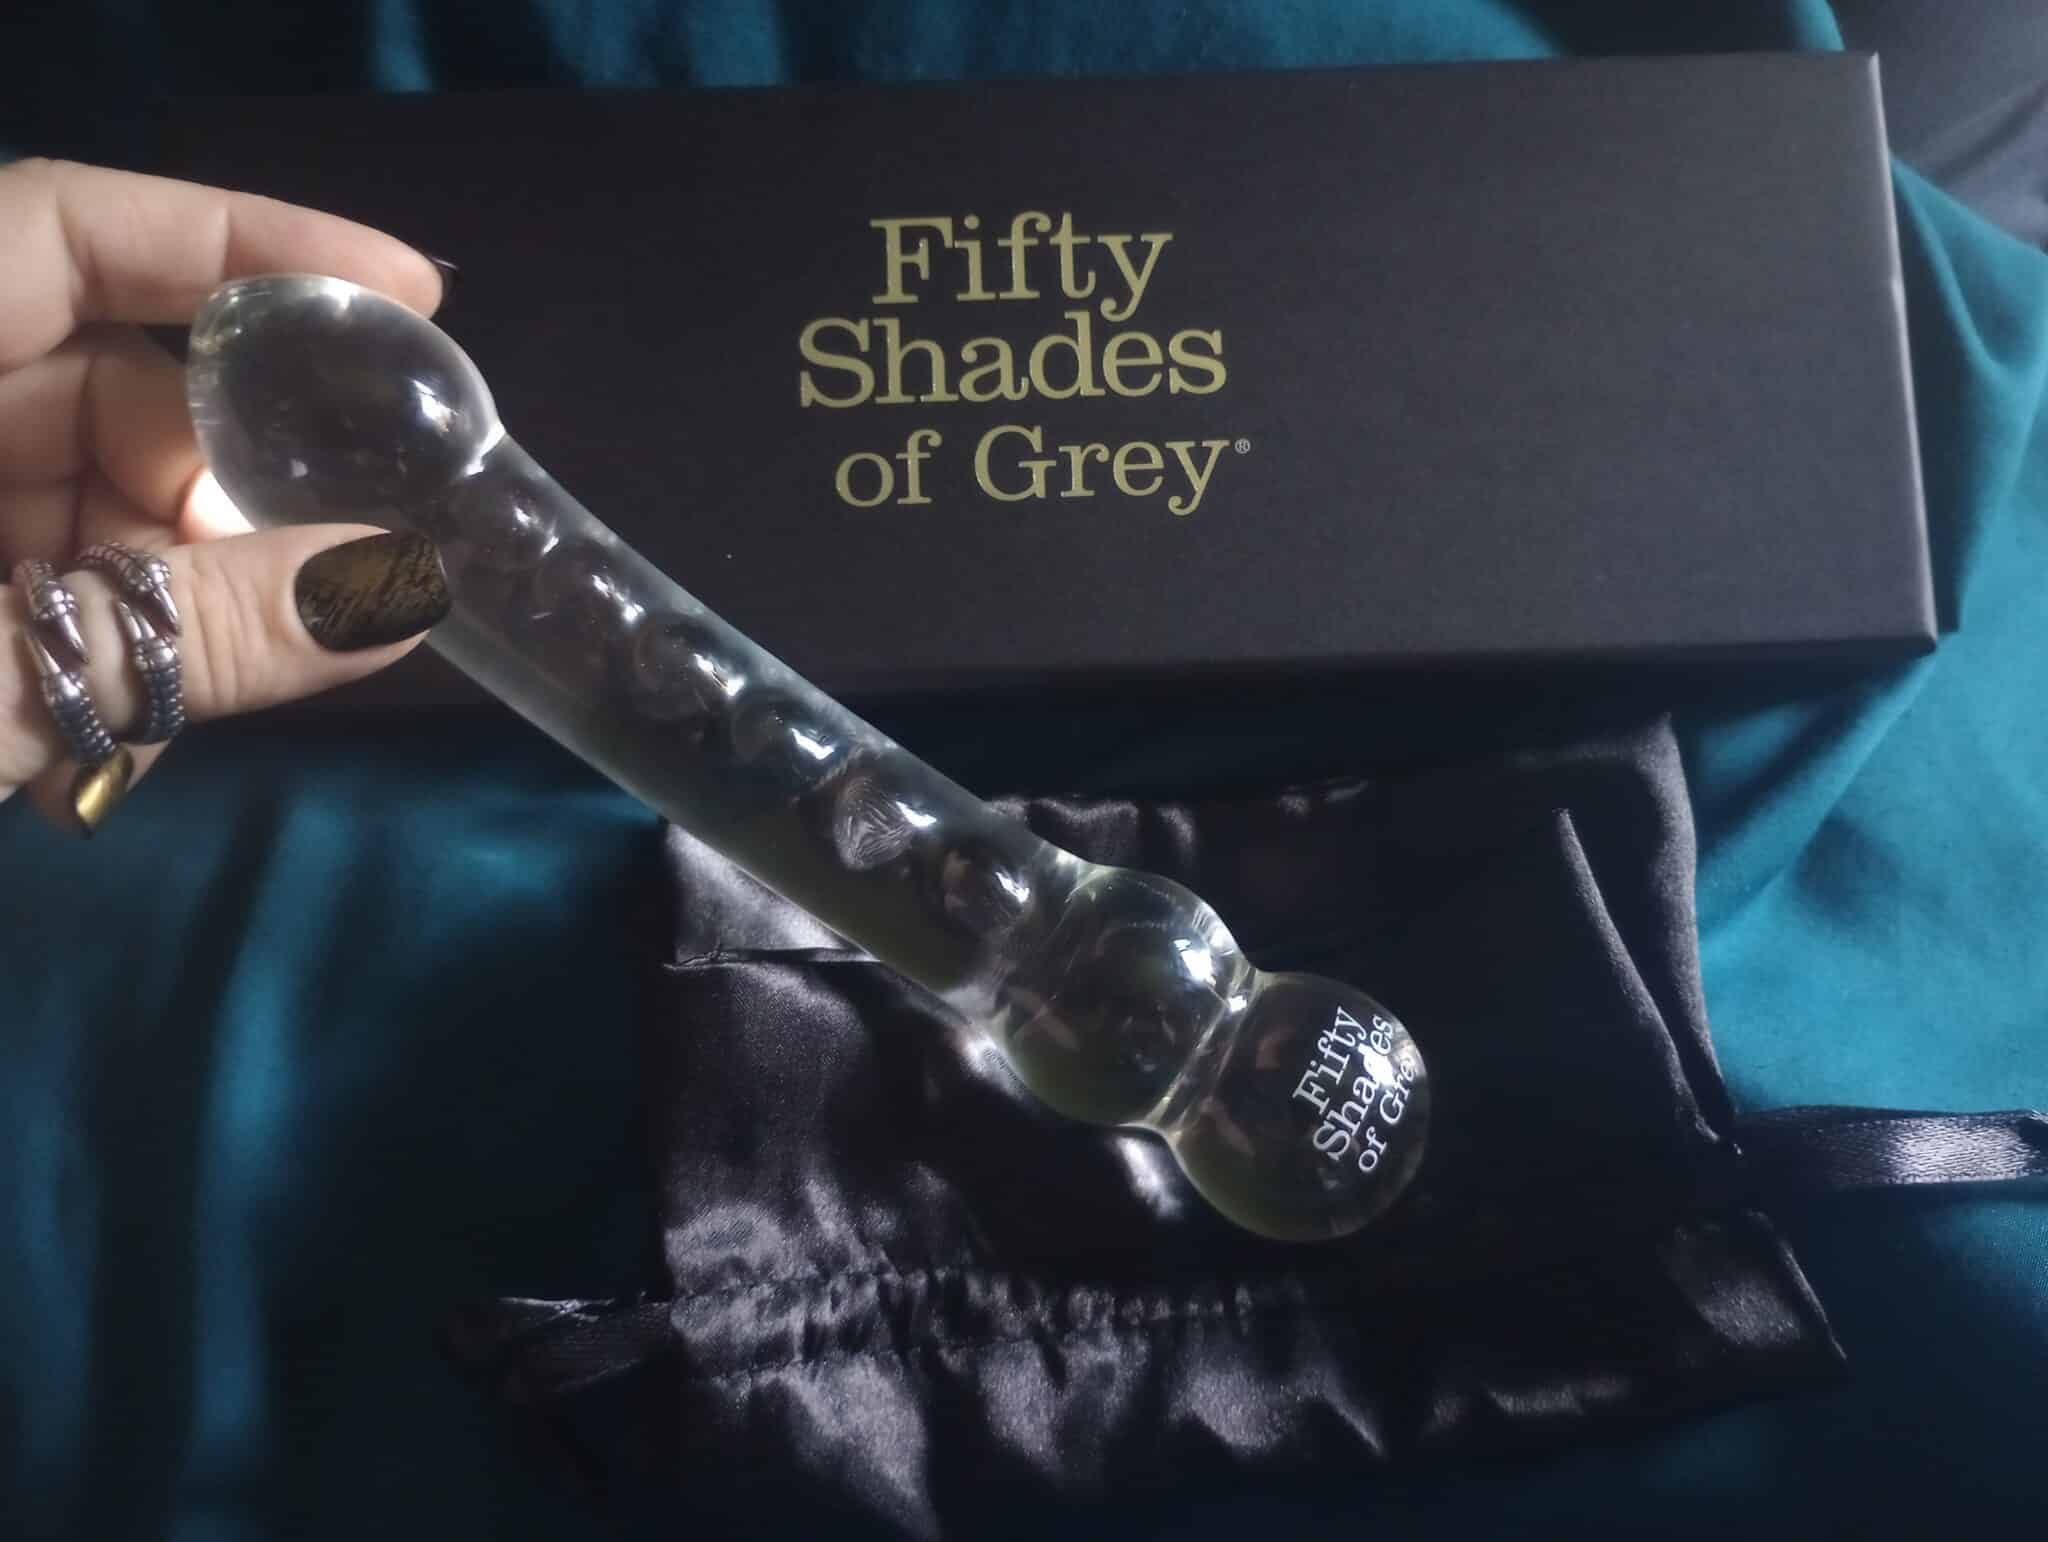 Fifty Shades of Grey Drive Me Crazy Glass Massage Wand Assessing the Fifty Shades of Grey Drive Me Crazy Glass Massage Wand’s Quality